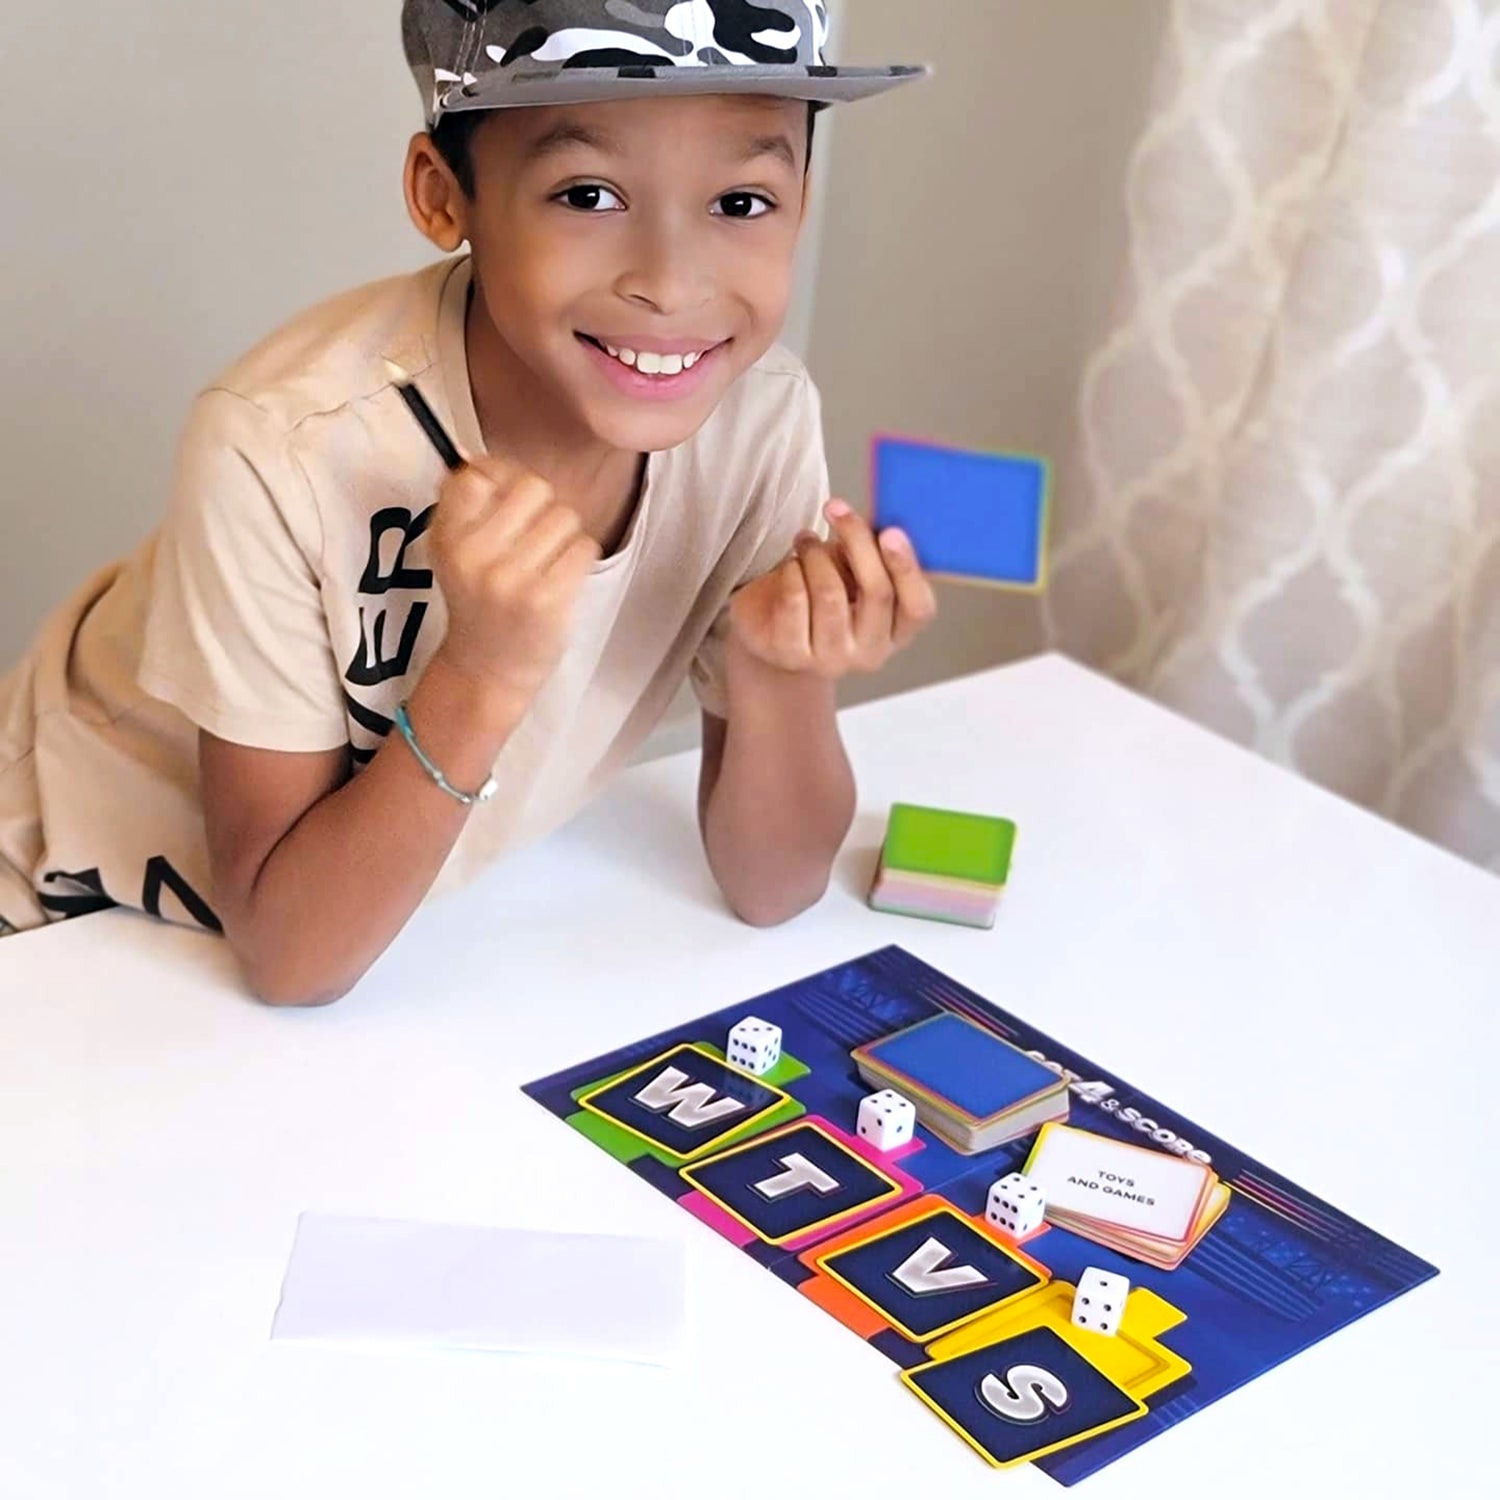 Get 4 and Score by SimplyFun is a vocabulary game and quick thinking game that is fun for the whole family.